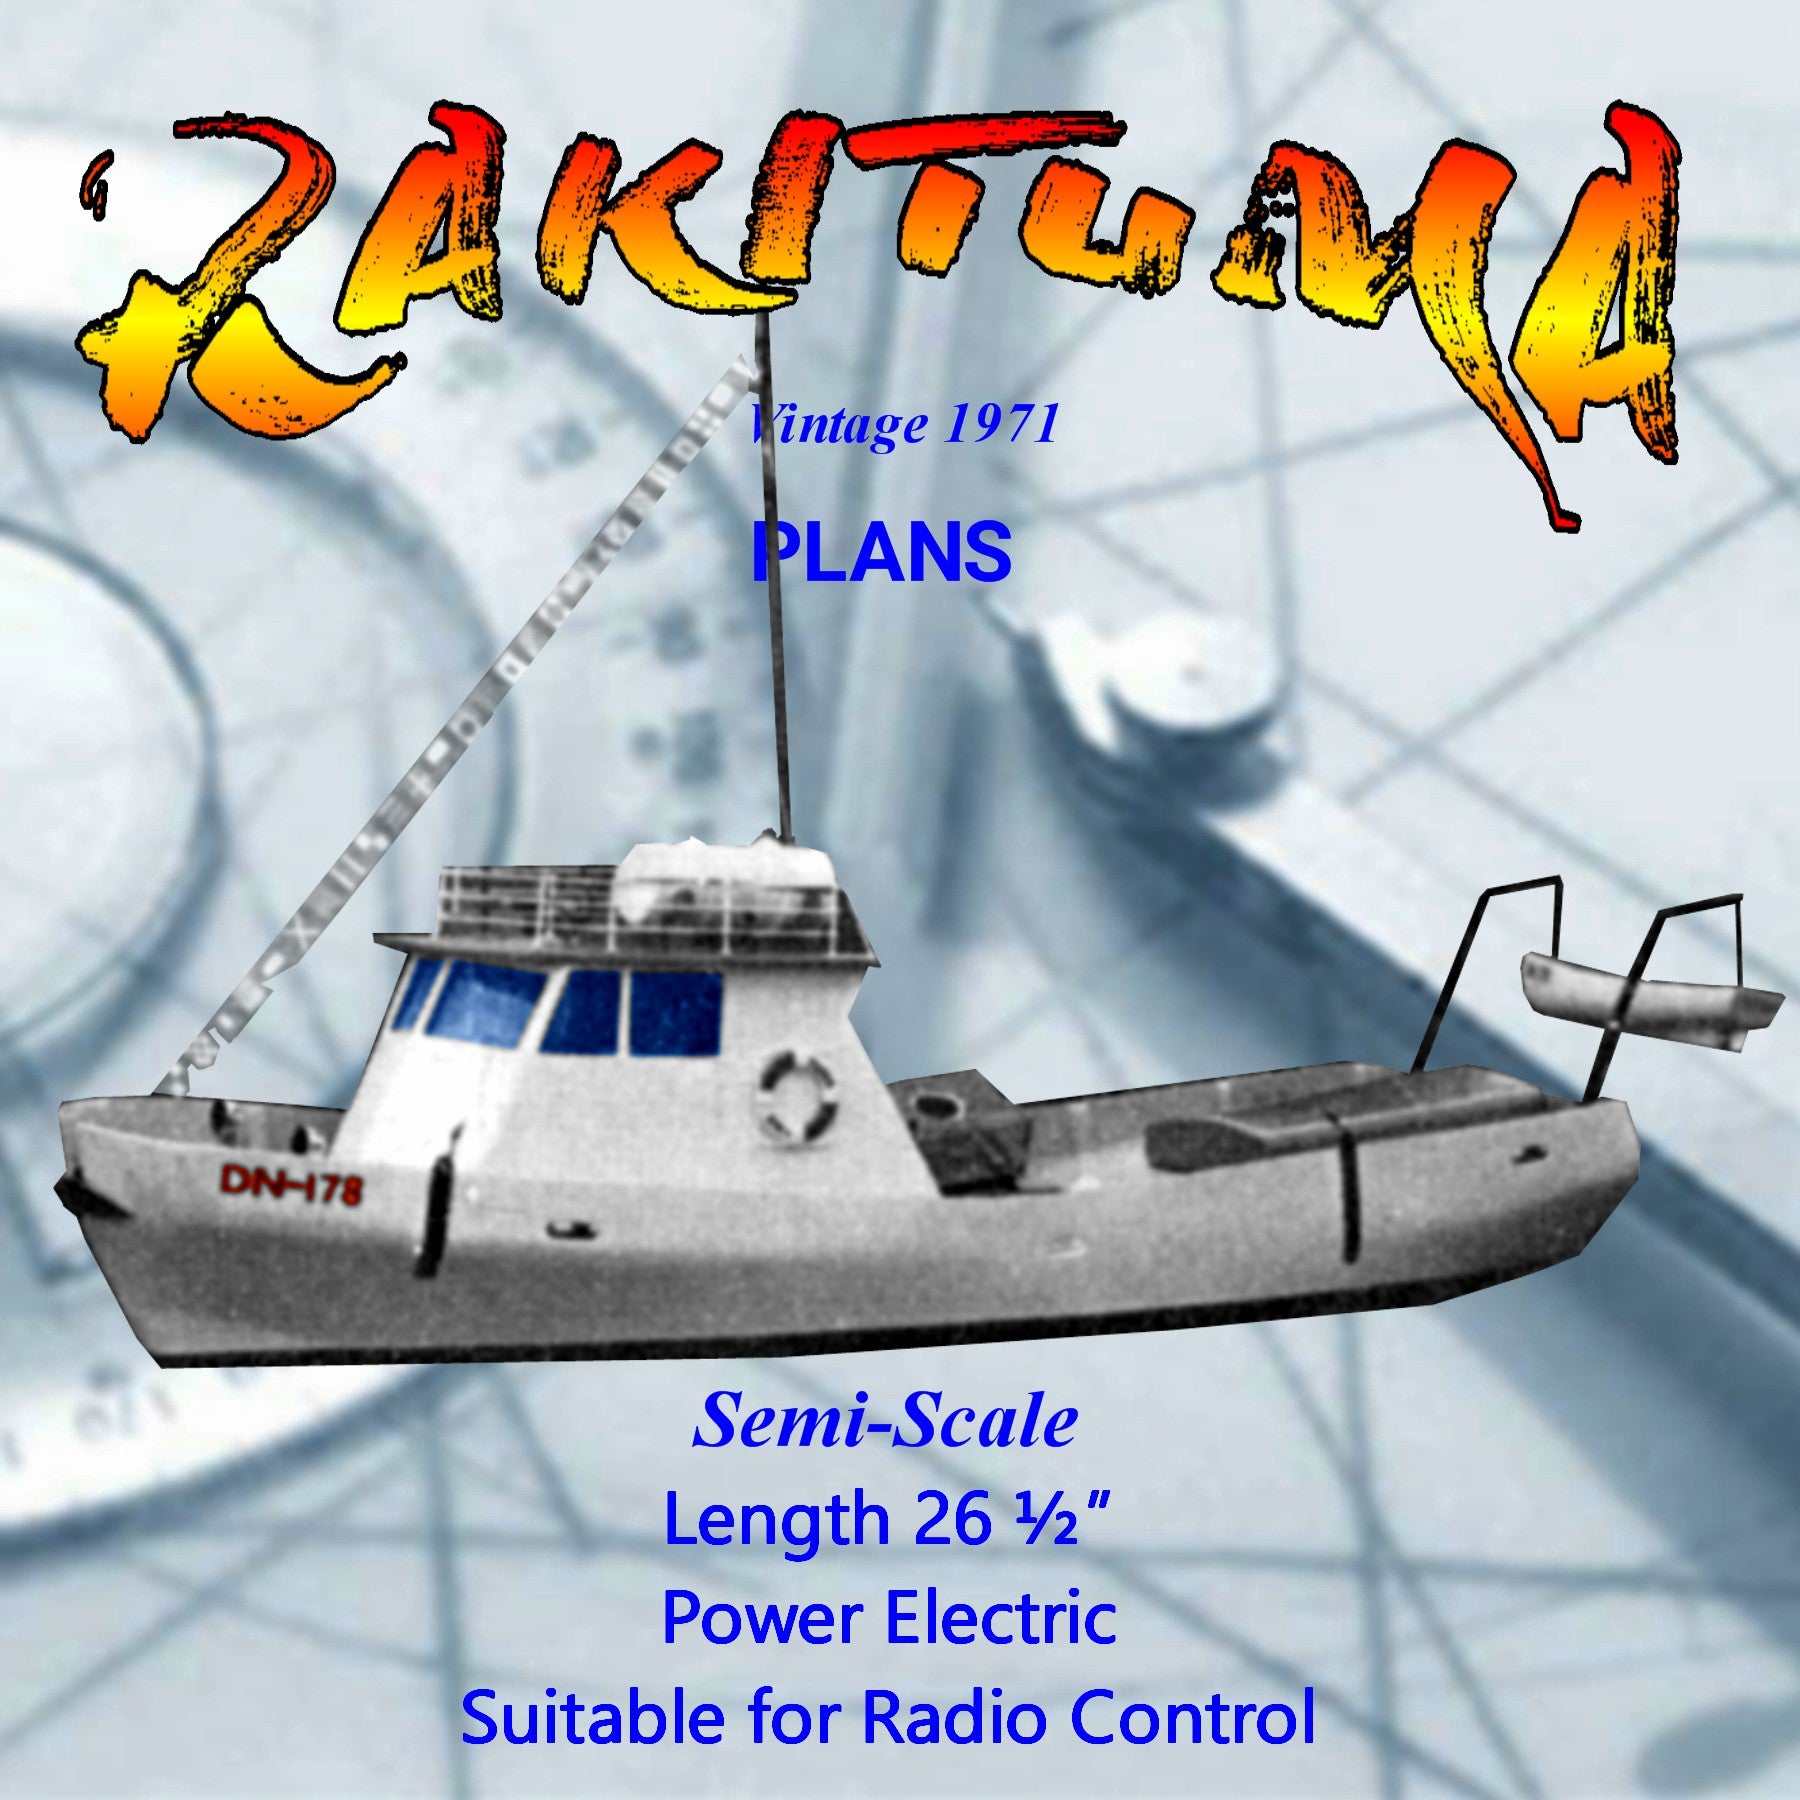 full size printed plan semi-scale26 1/2'new zealand fiordland crayfishing vessel suitable for radio control